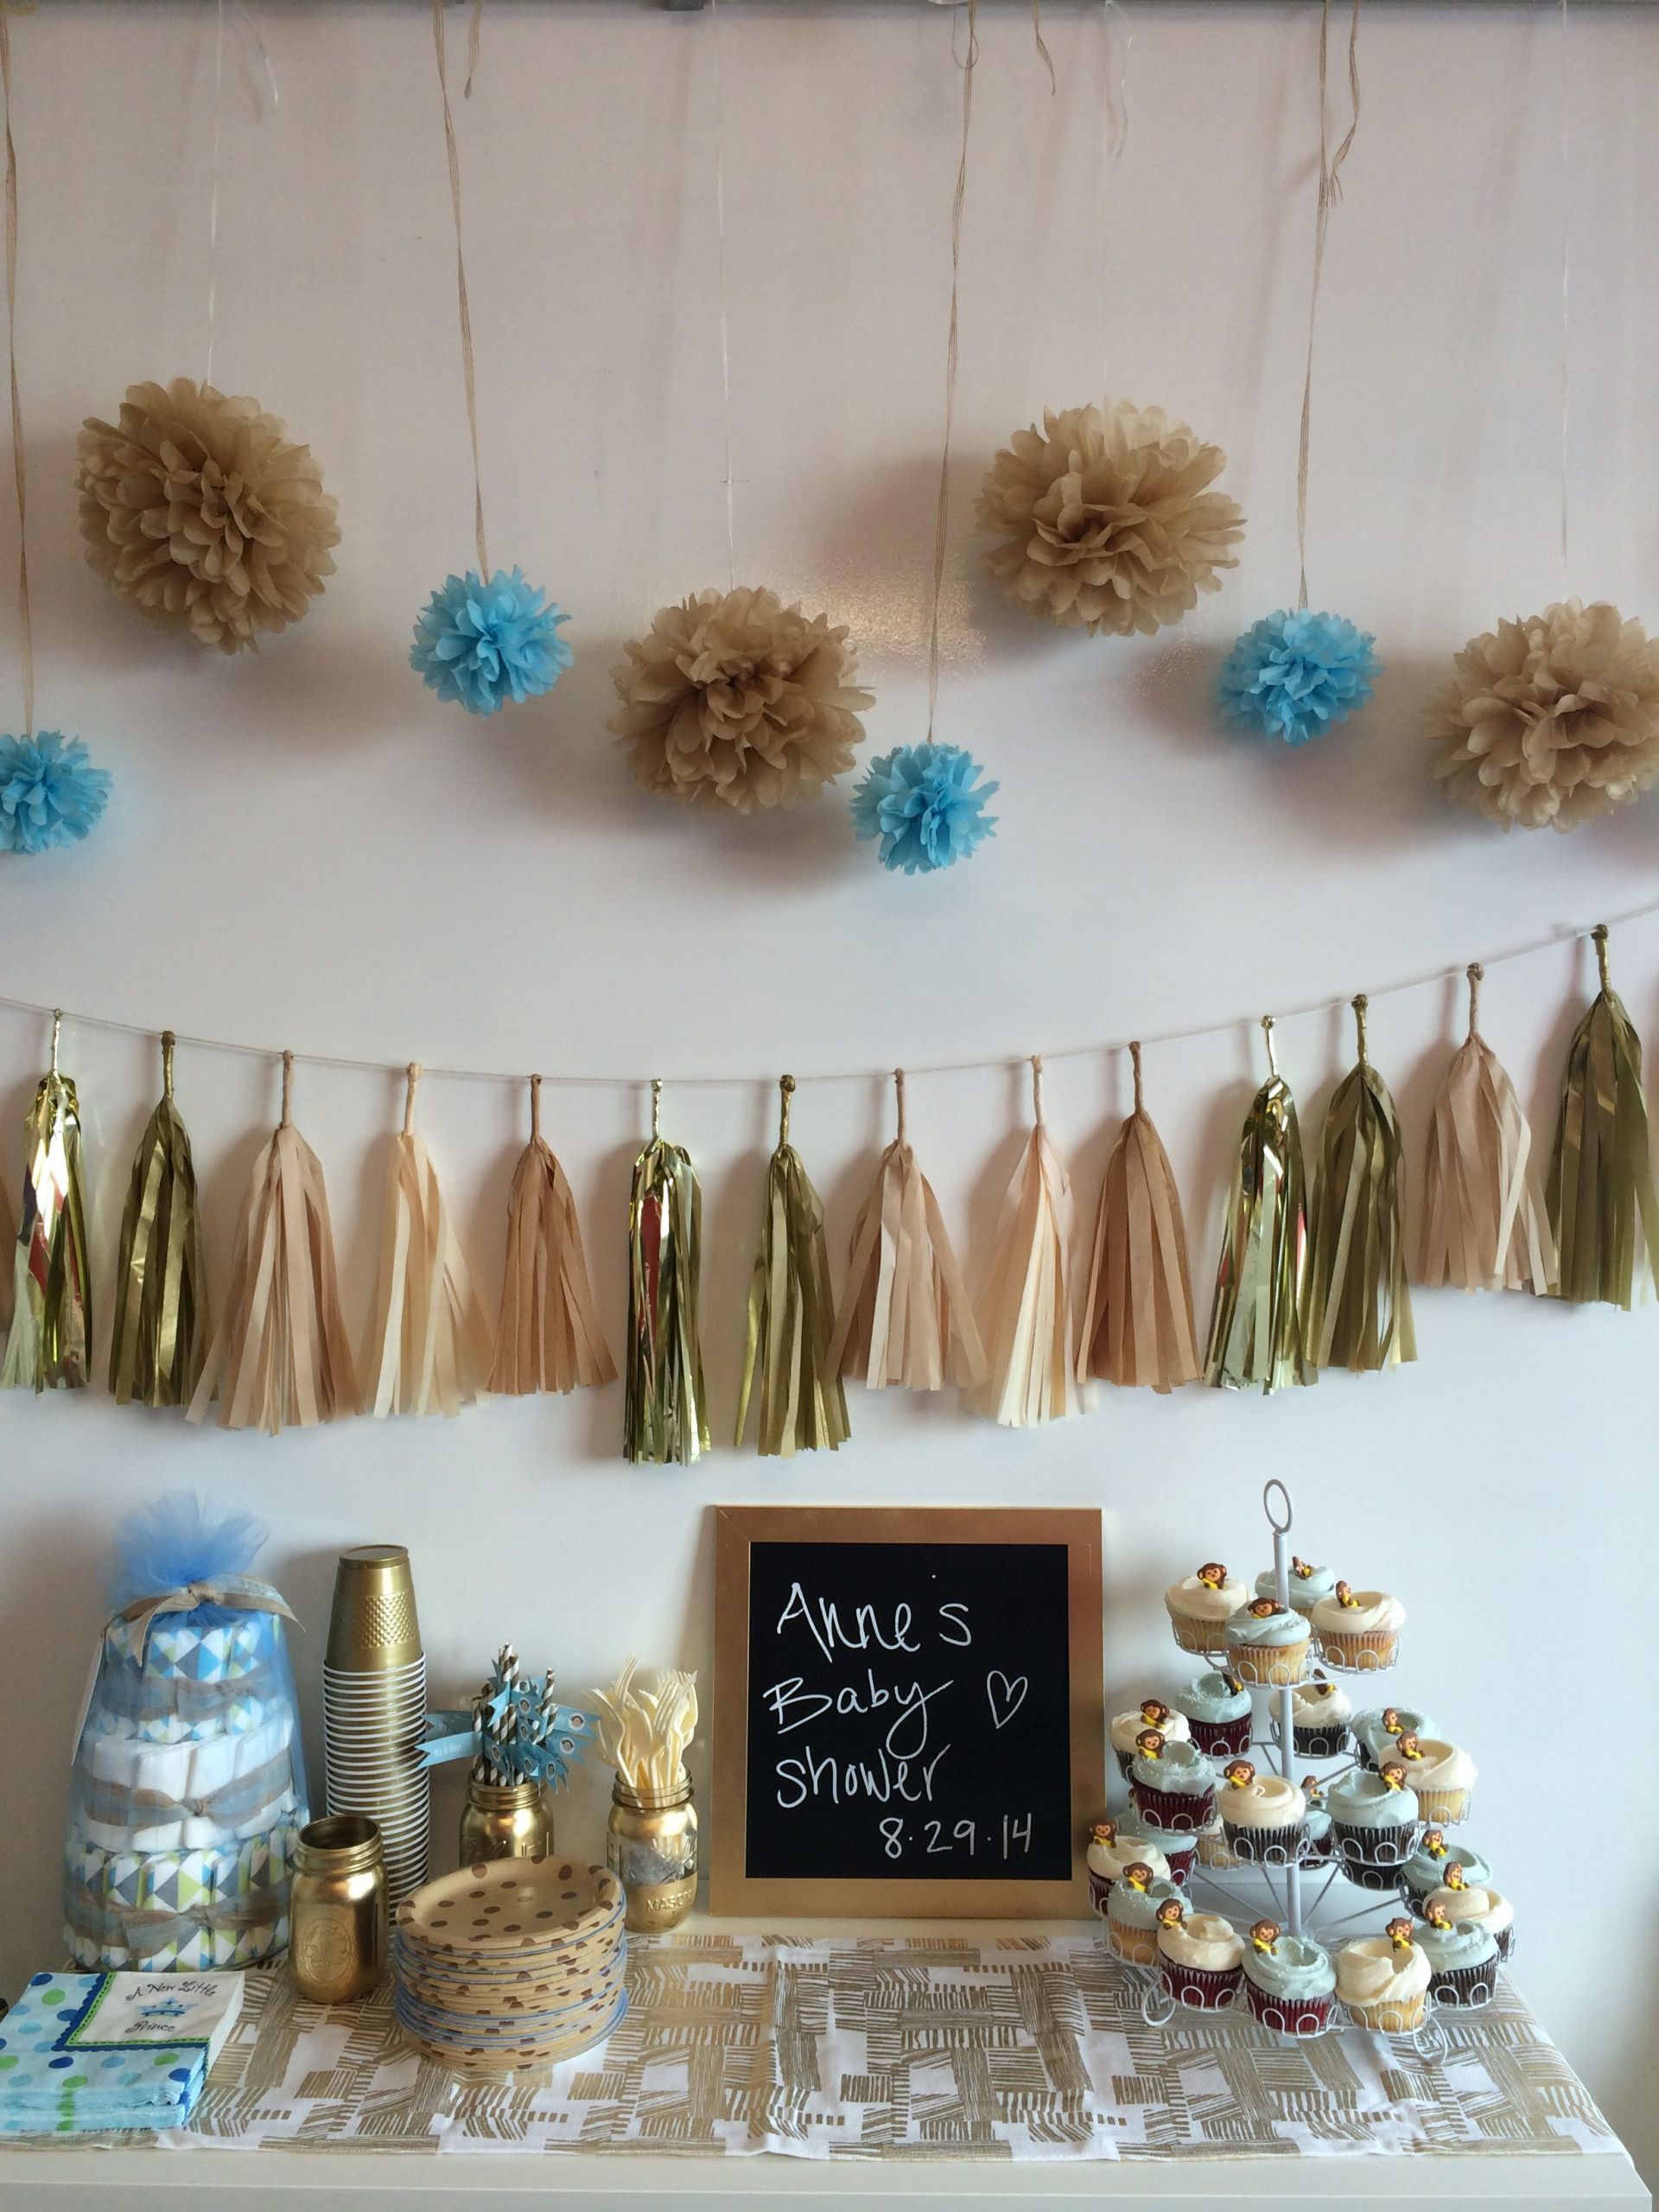 DIY Baby Boy Shower Decorations
 DIY How to Throw an fice Baby Shower for a Co Worker